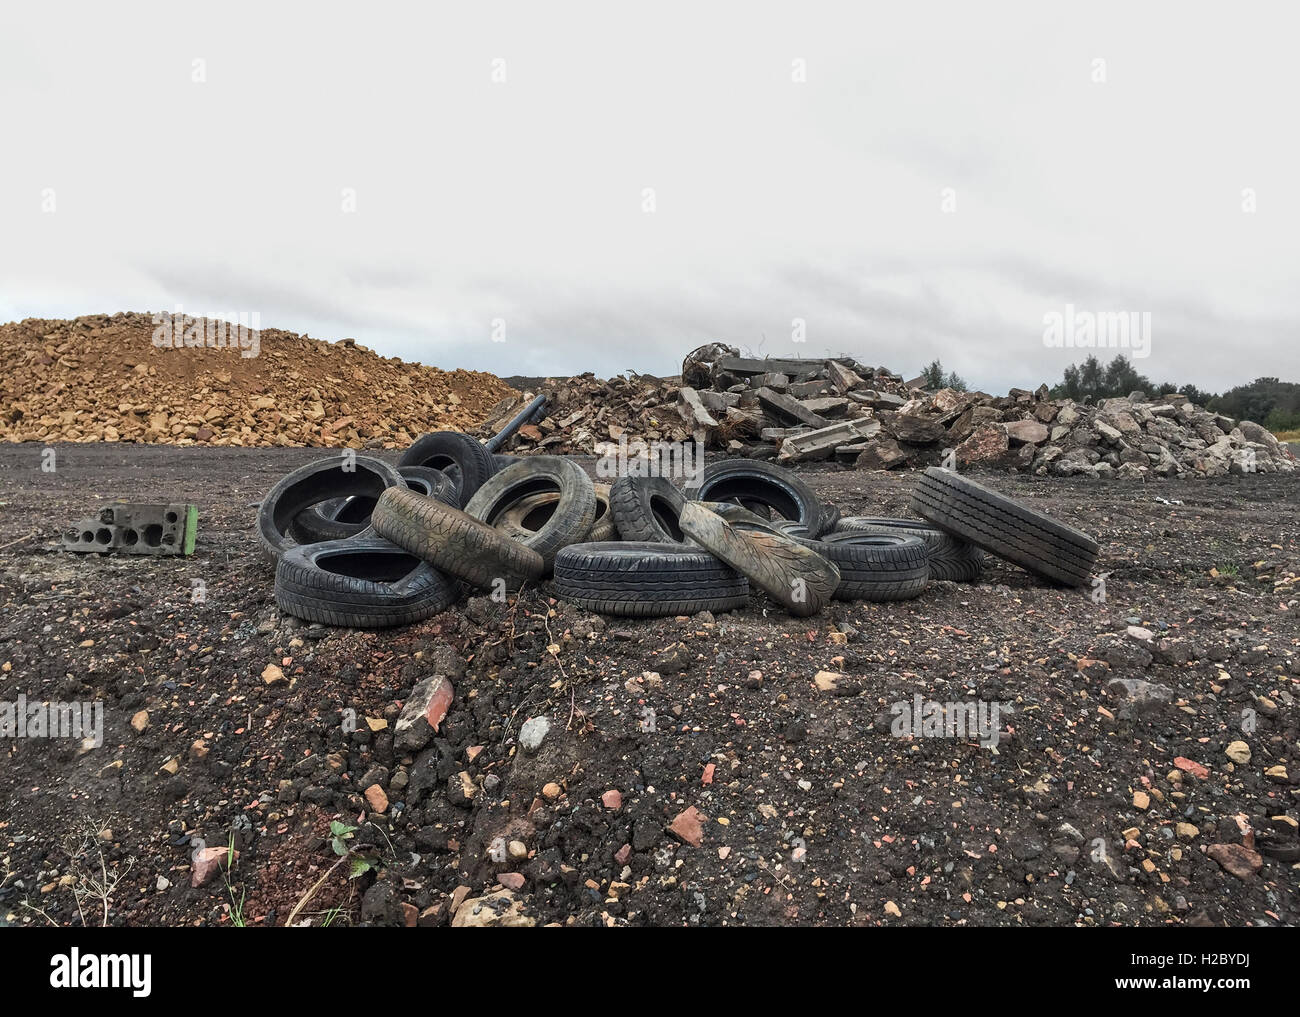 Pile of tyres on recently flattened construction site. Stock Photo